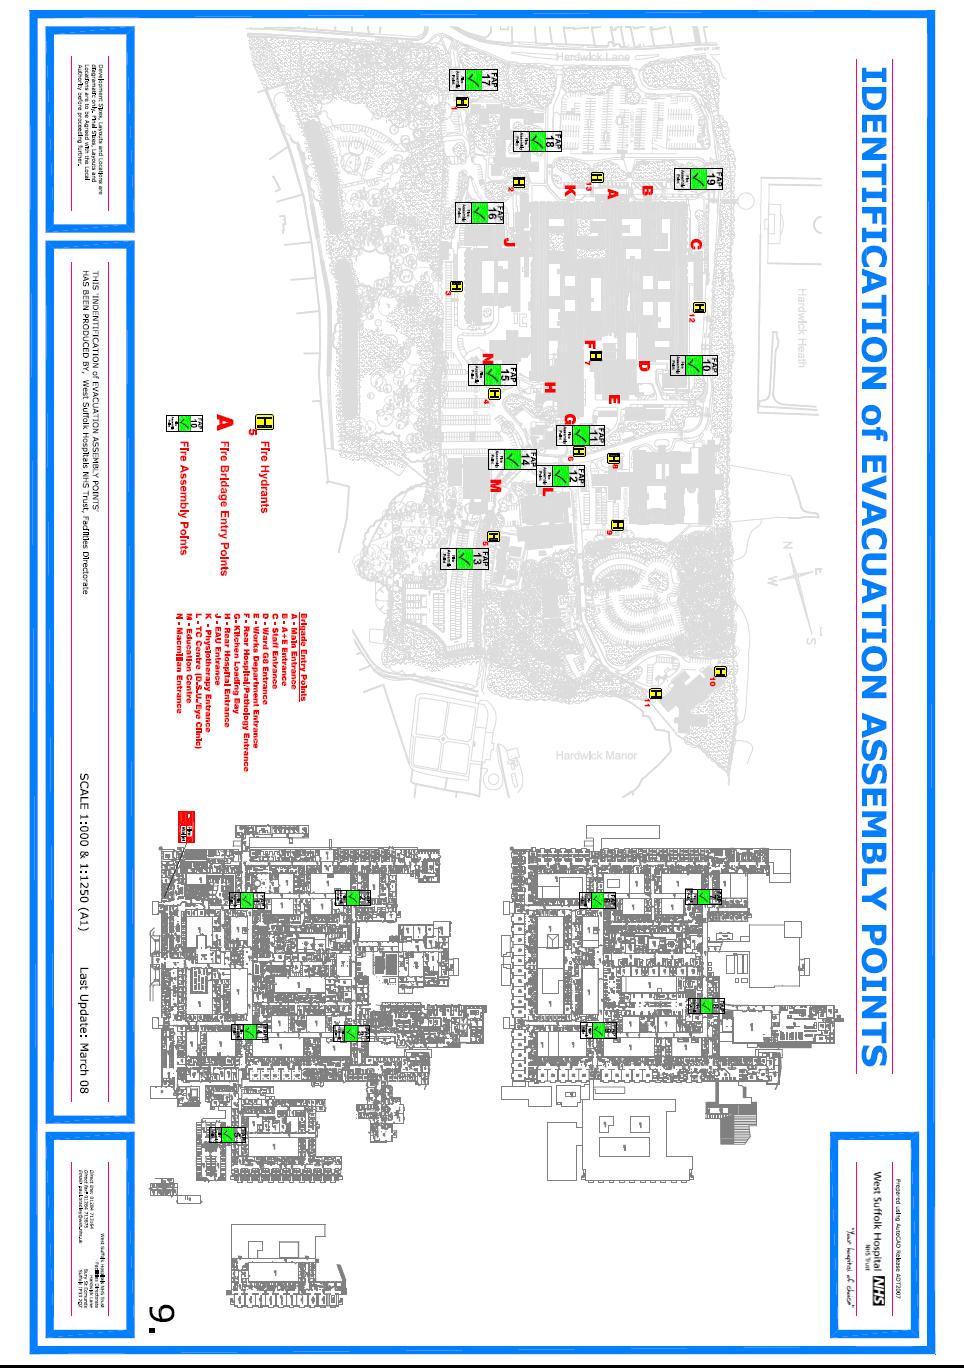 28.5 Site map Source: Compliance